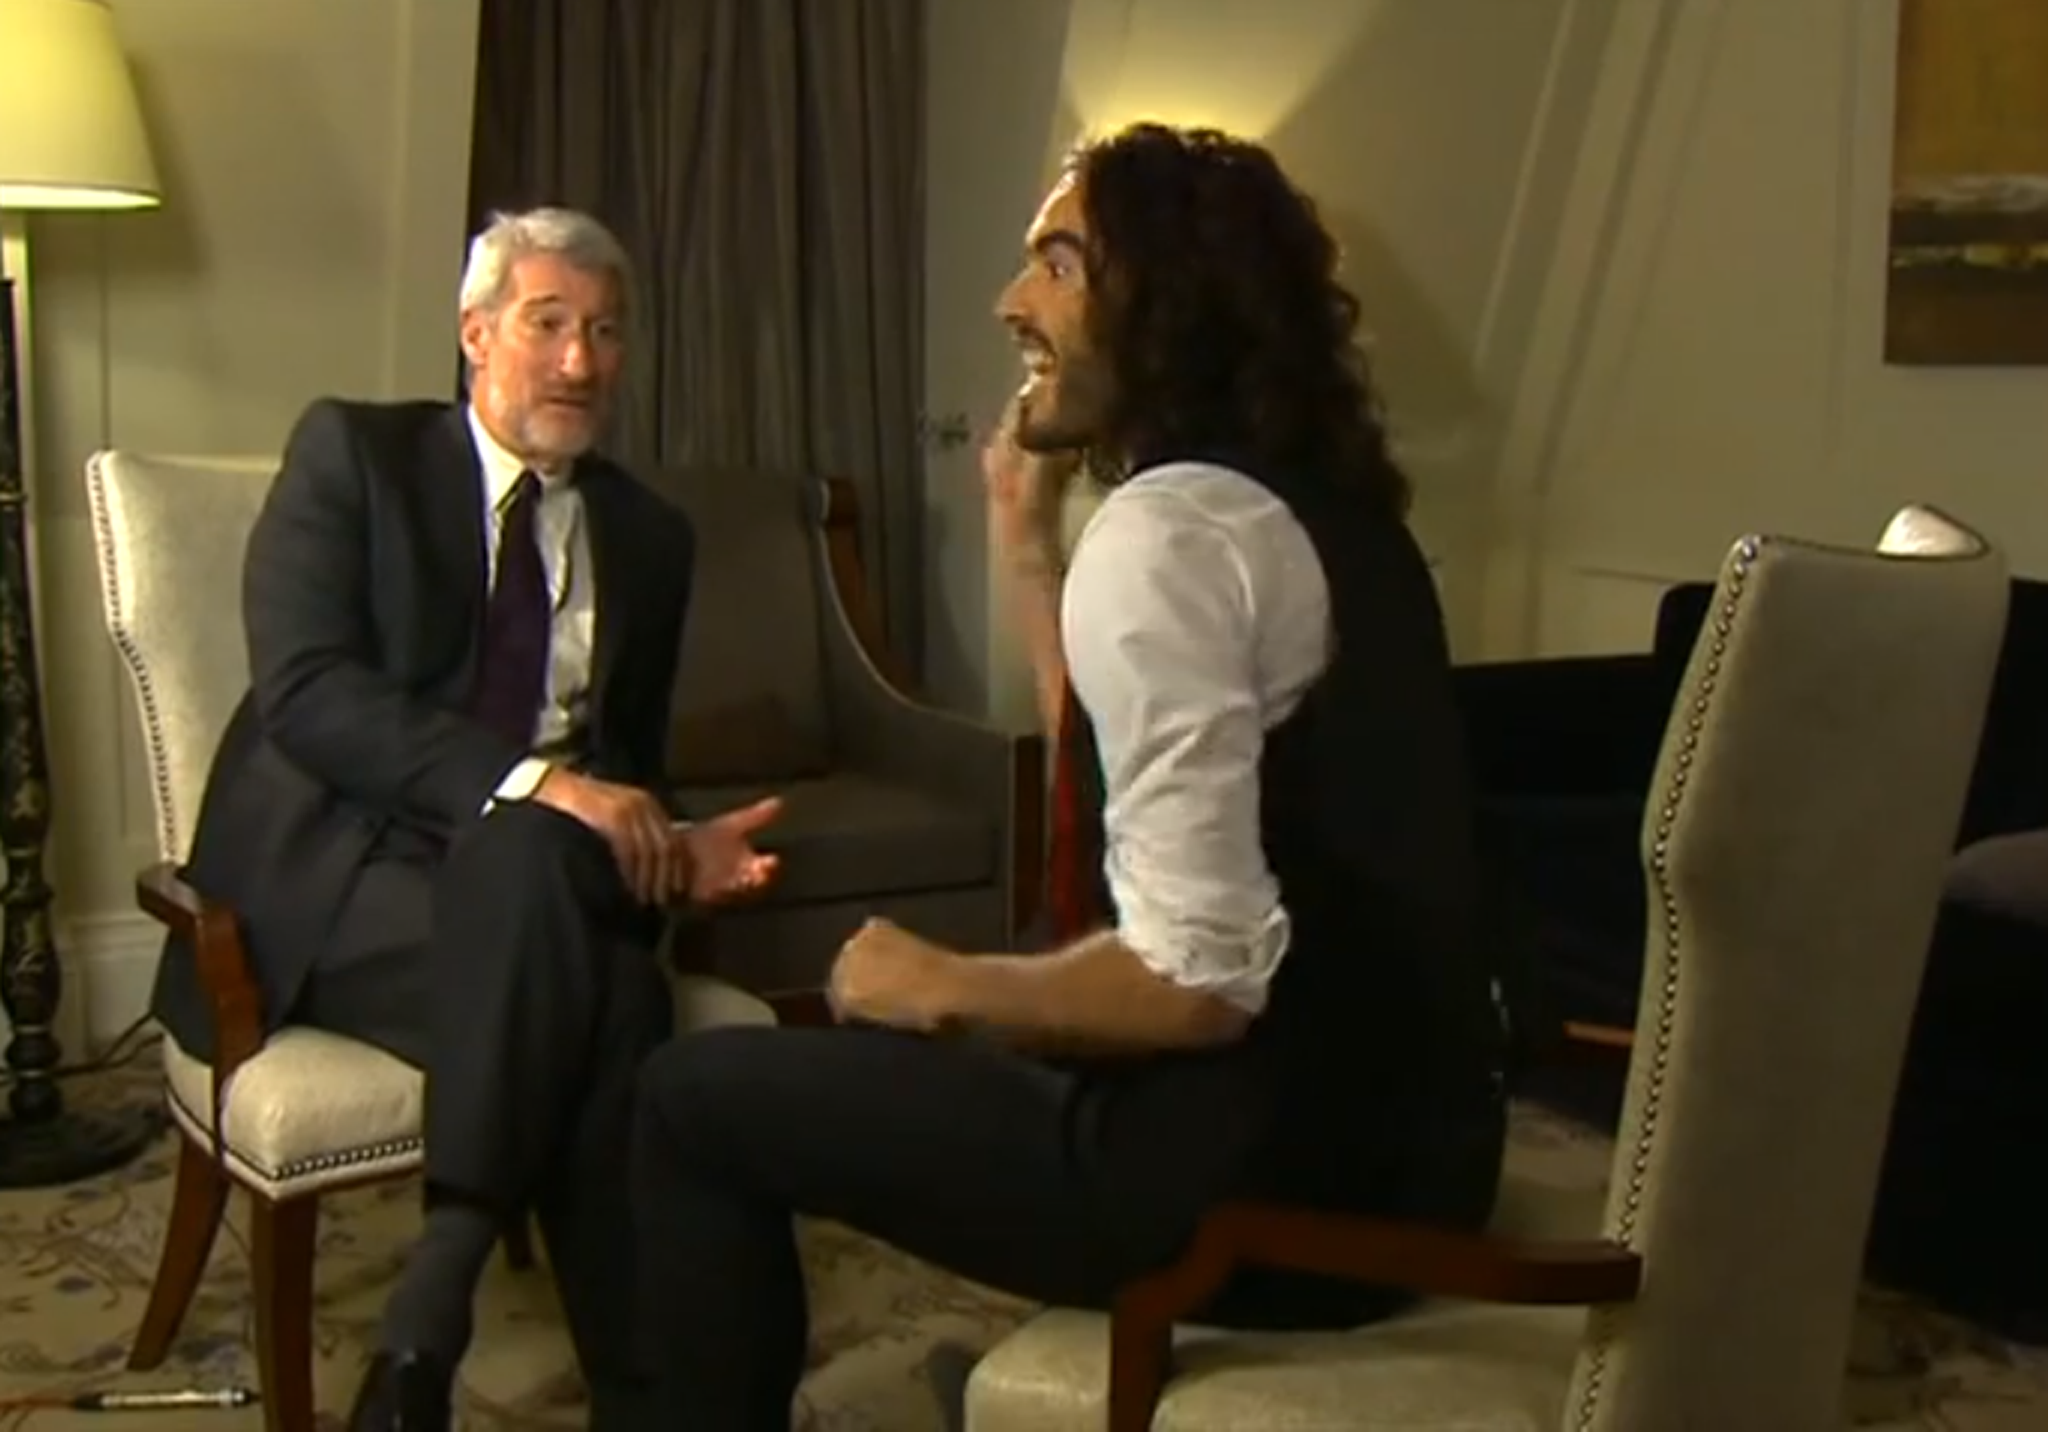 Jeremy Paxman interview Russell Brand for Newsnight